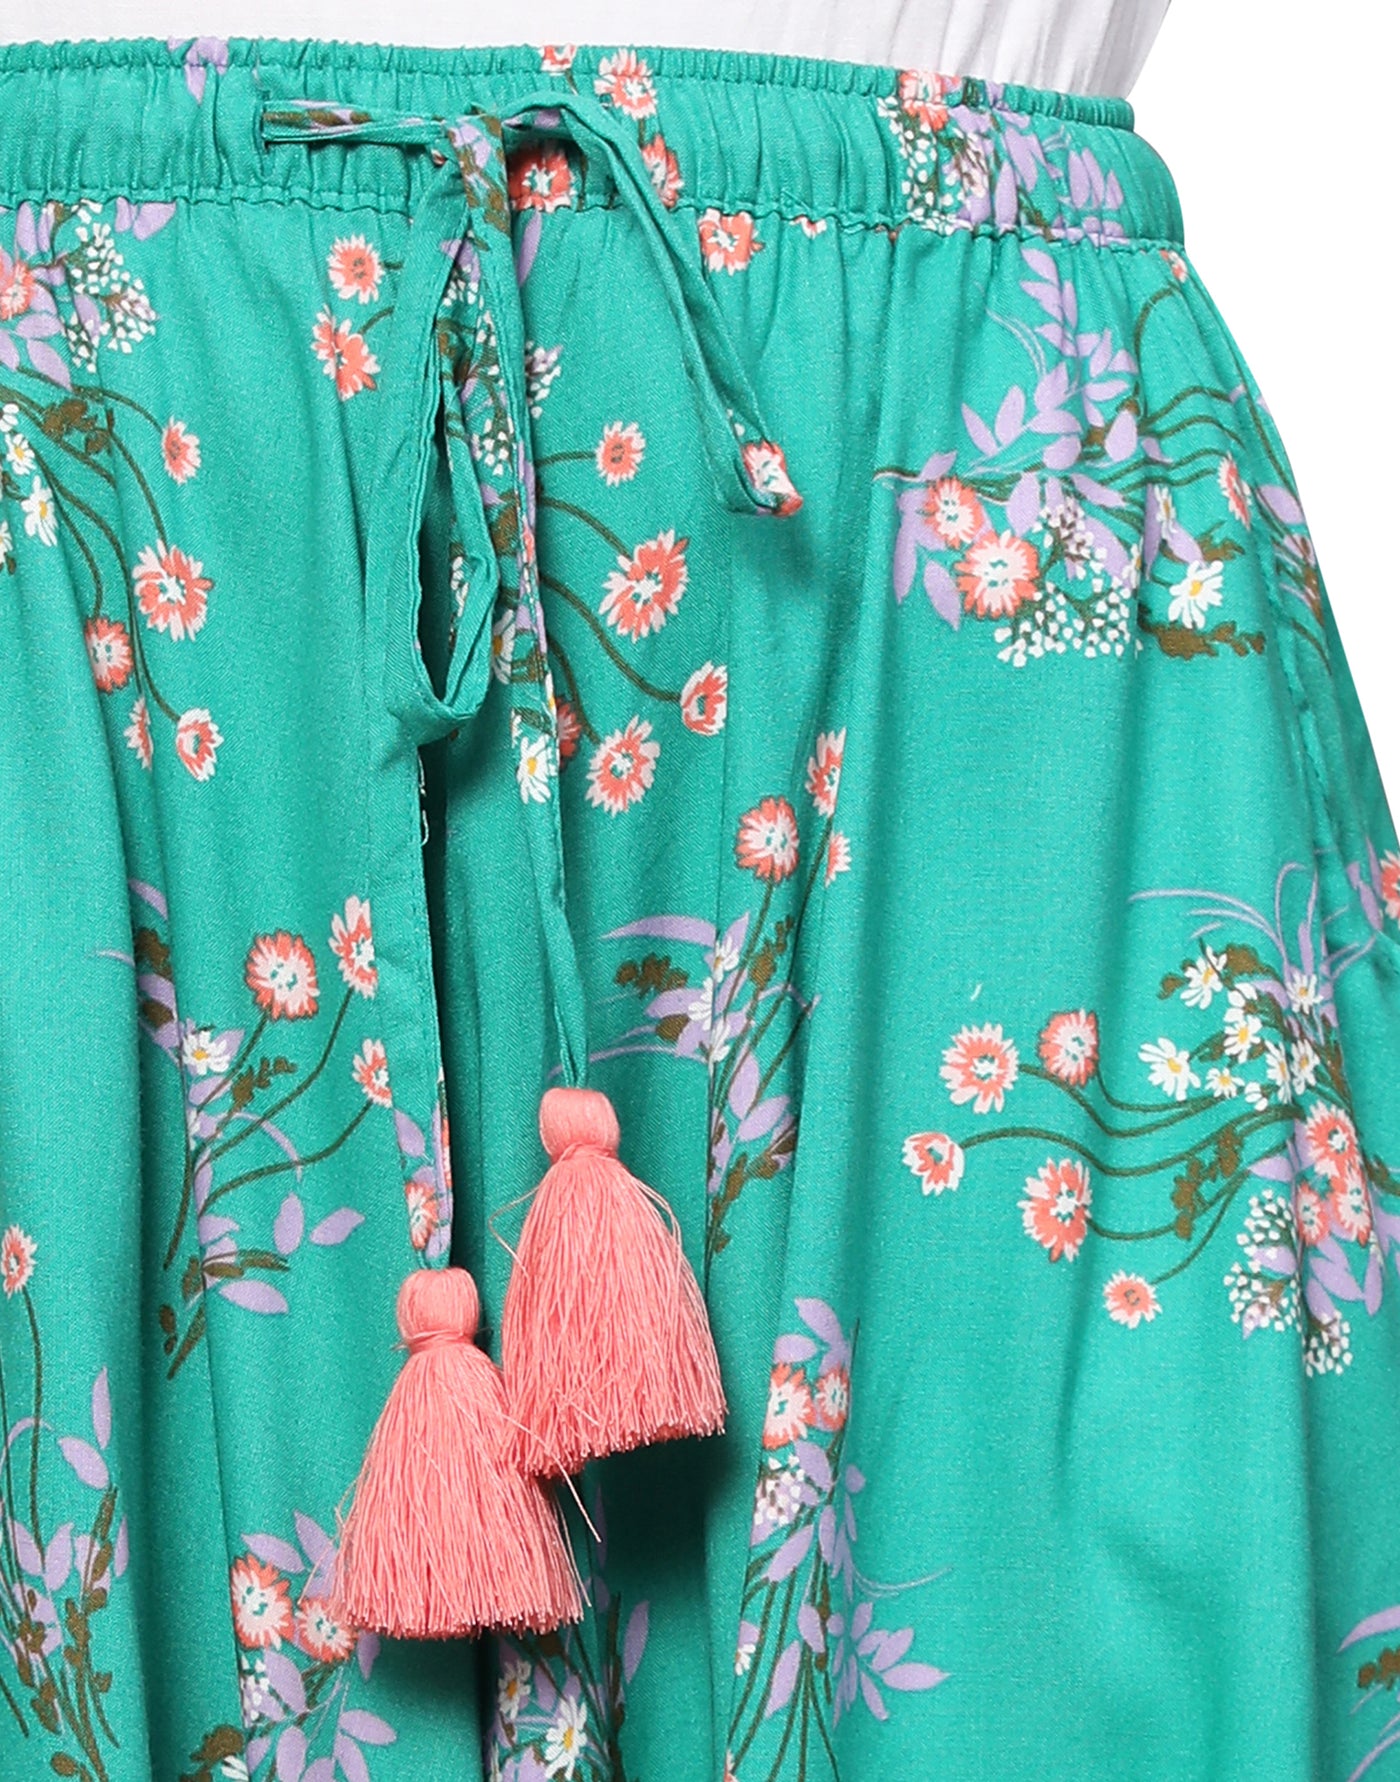 Culottes Shorts for Women-Green Floral